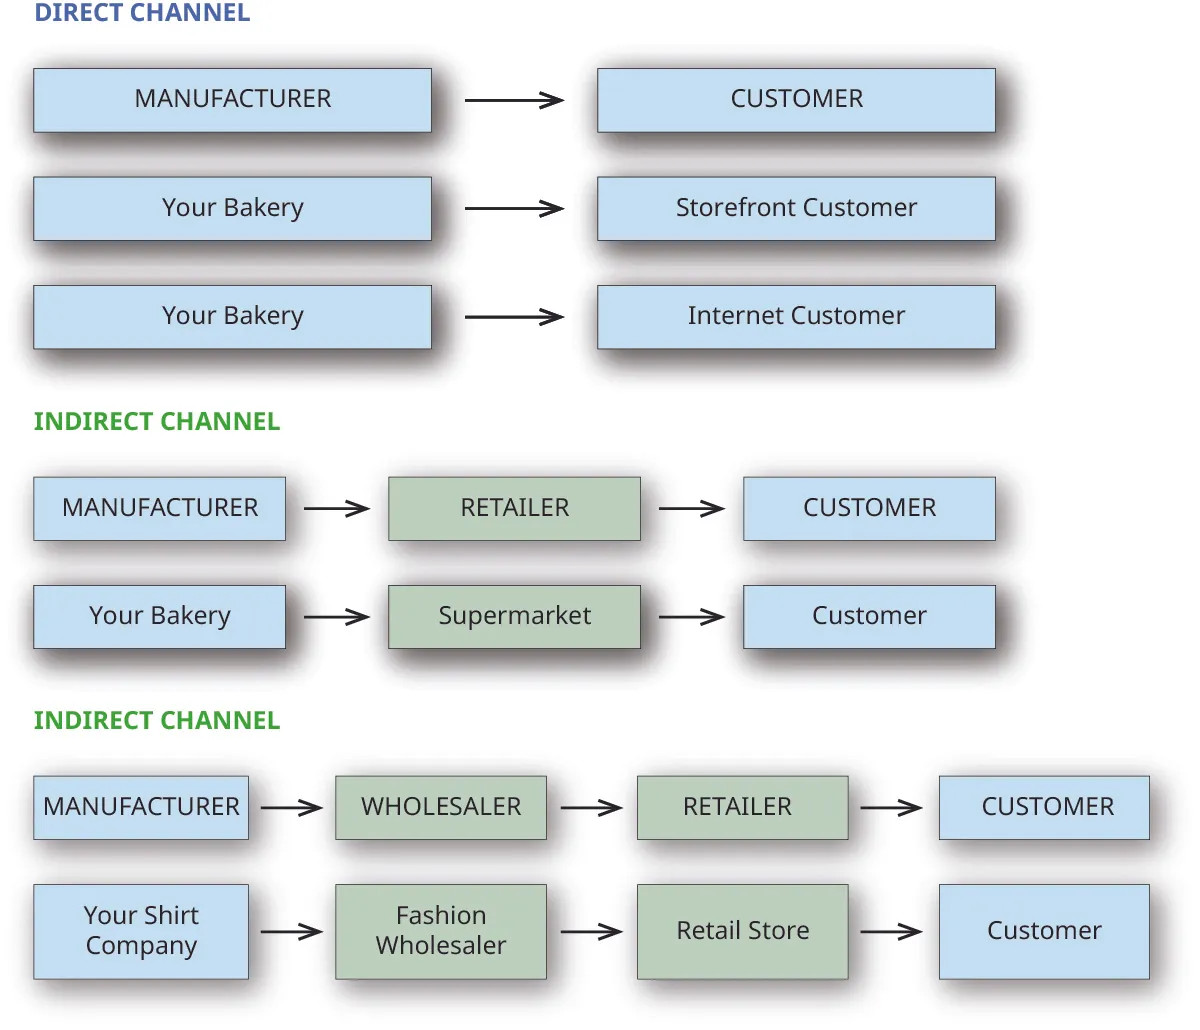 An illustration of a manufacturer (bakery) selling to a customer directly via a storefront or the Internet. The bakery could also sell indirectly using a retailer like a supermarket to the customer. In another example, a manufacturer that is a shirt company can use a fashion wholesaler as an indirect channel of sale, which would supply a retail store with products to sell to the customer.